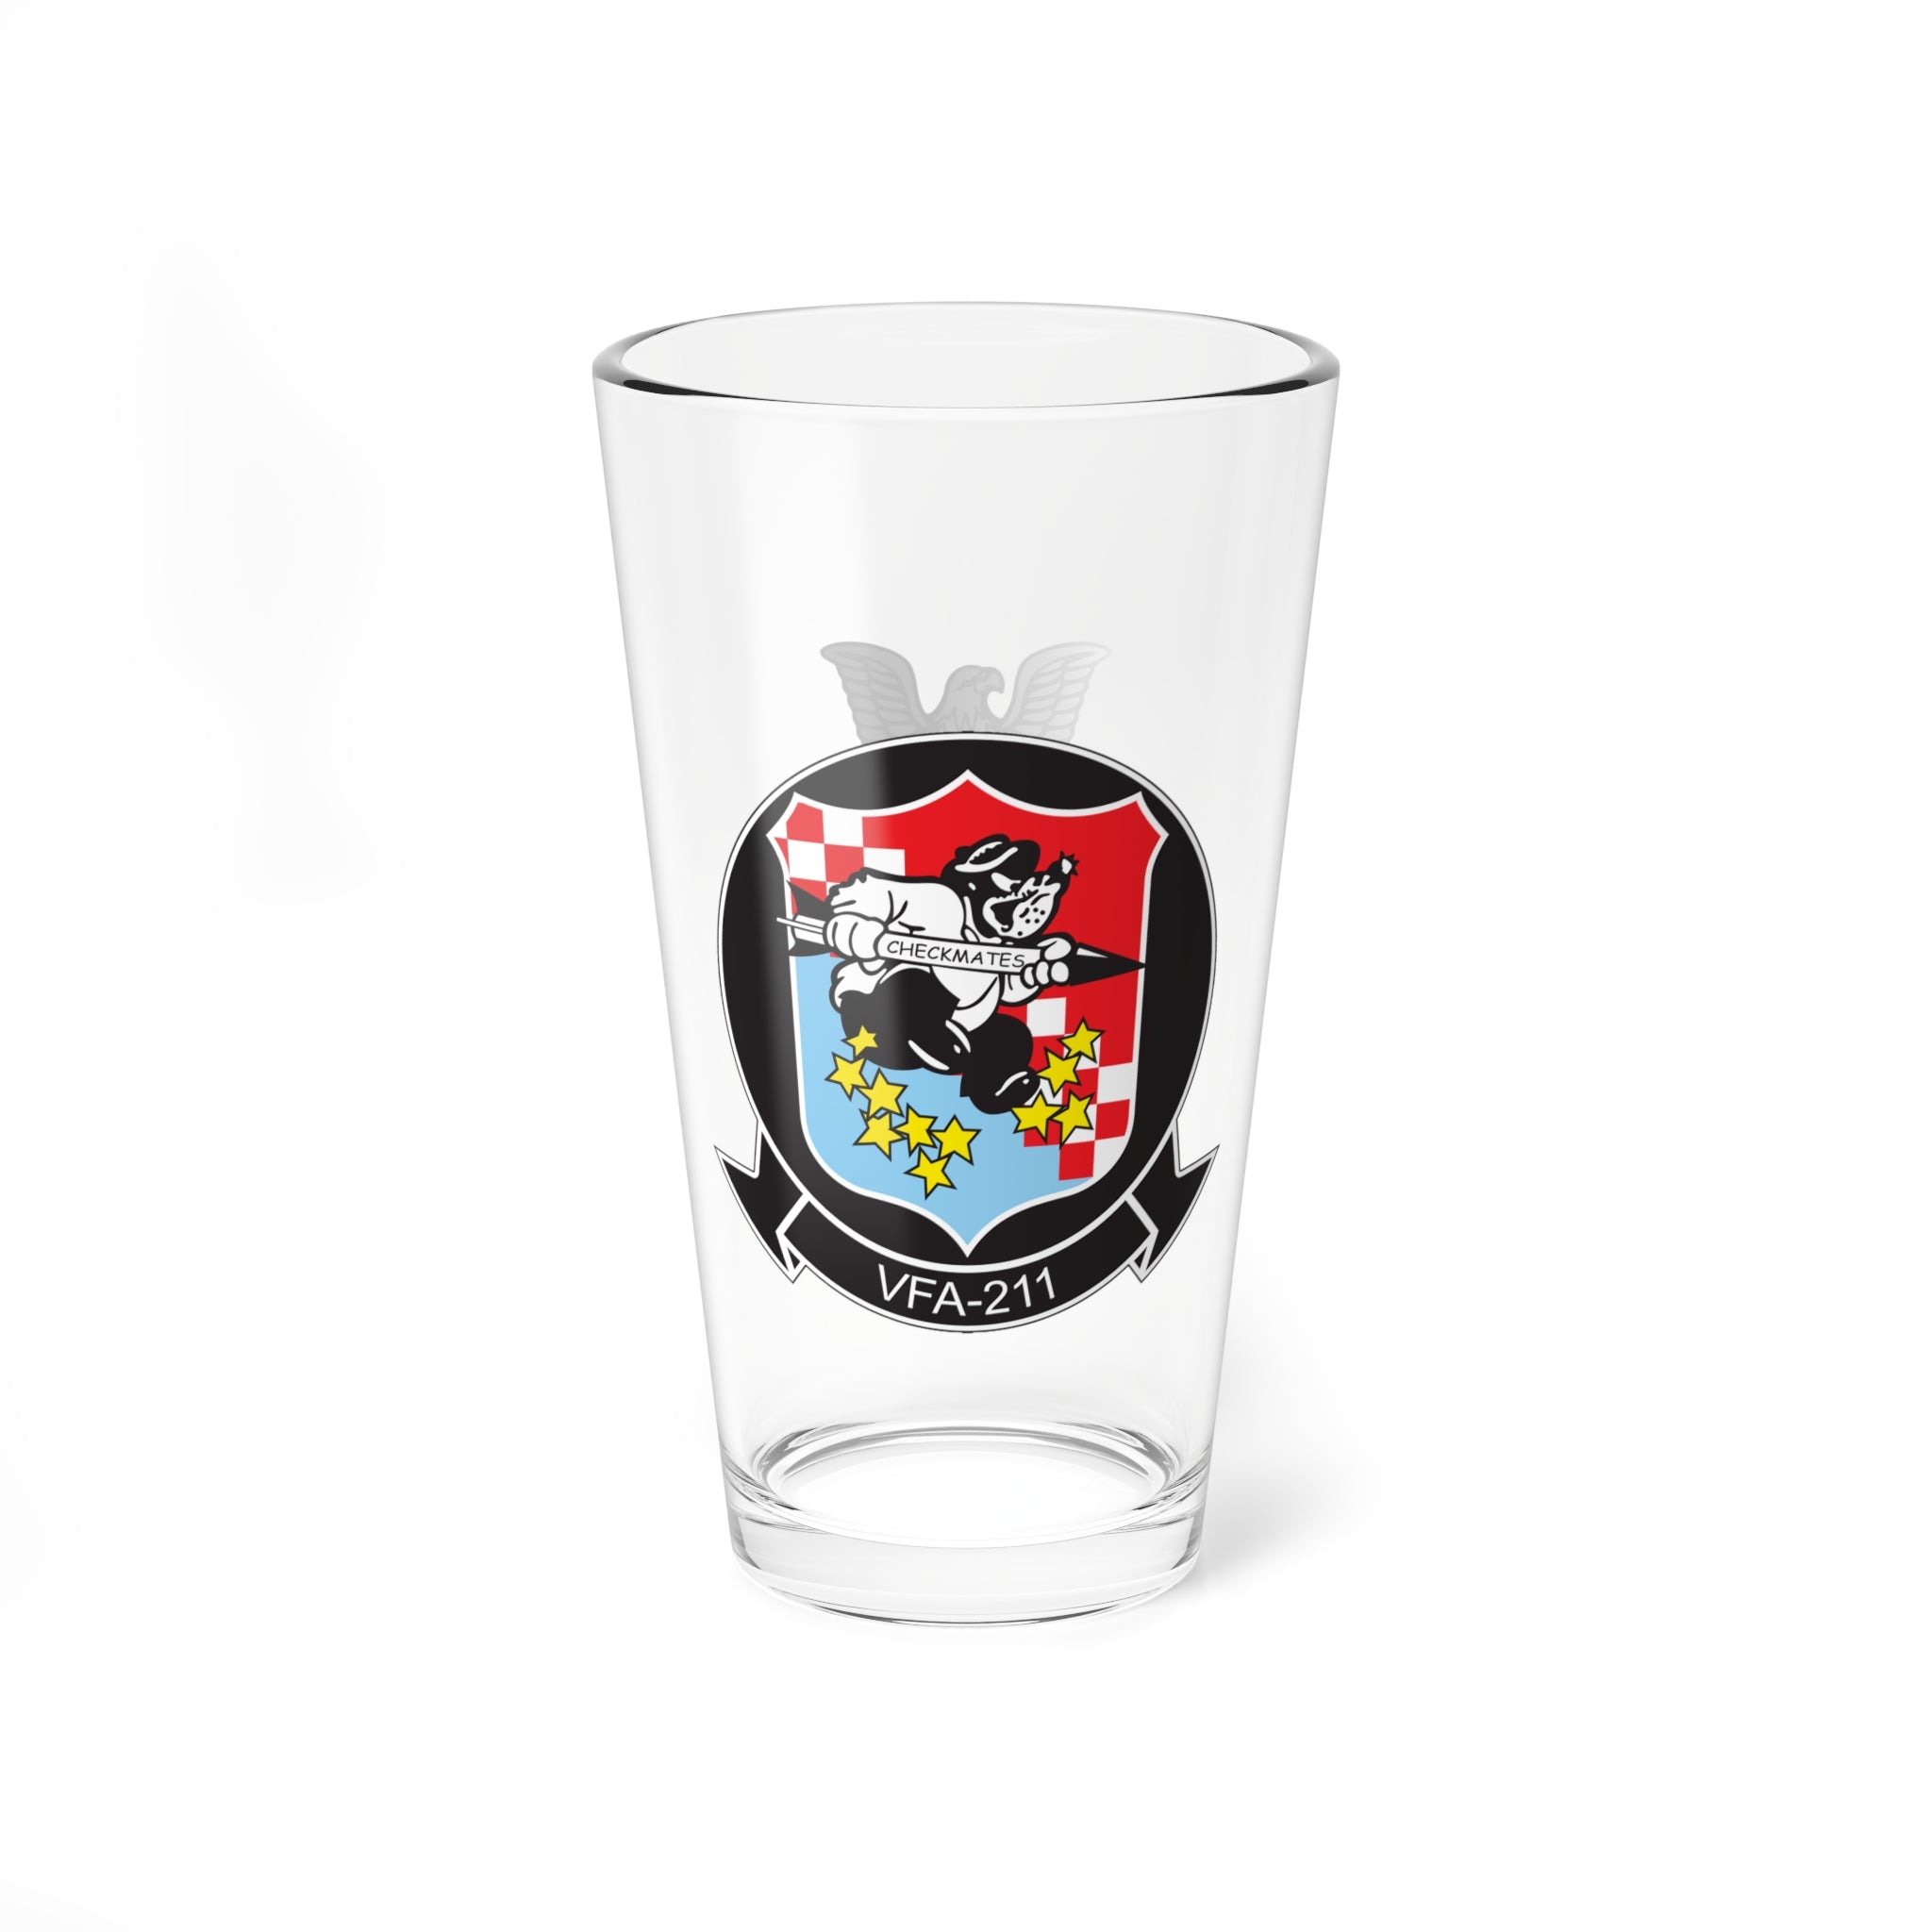 VFA-211 "Fighting Checkmates" AD2 Pint Glass, Navy Strike Fighter Squadron flying the F/A-18 Hornet